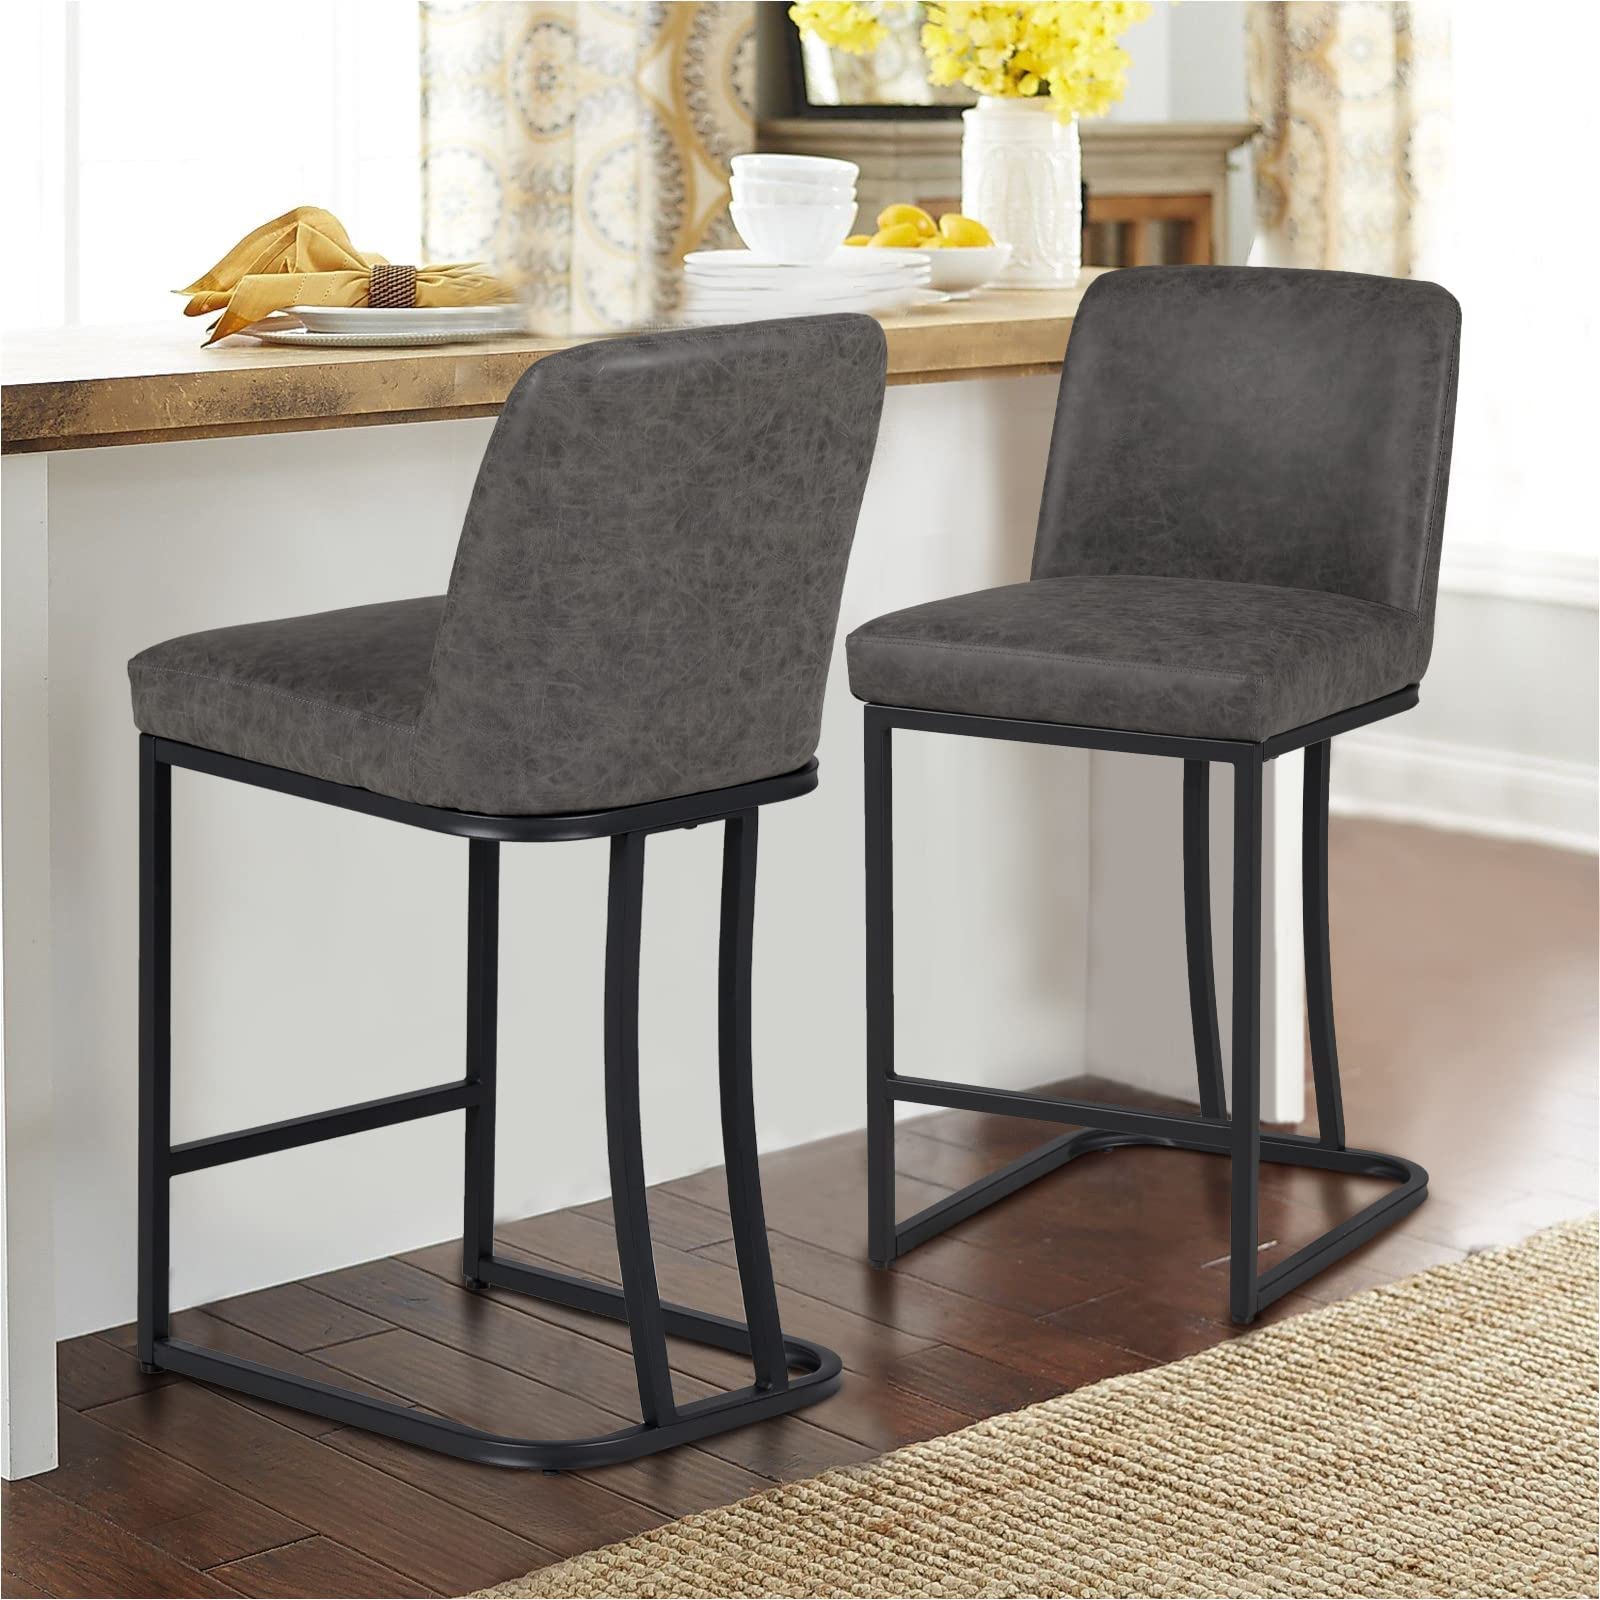 MAISON ARTS Counter Height 24" Bar Stools Set of 2 with Back for Kitchen Counter Modern Upholstered Barstools Faux Leather Farmhouse Bar Chairs...